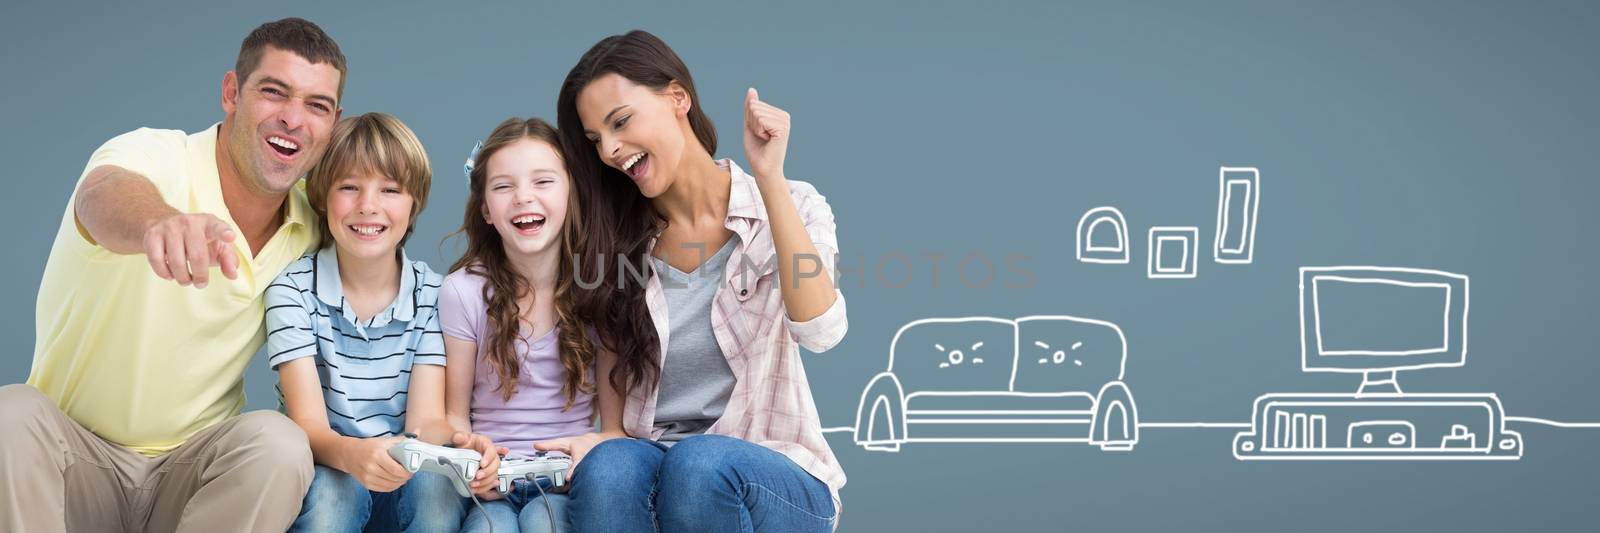 Family having fun together with television and couch drawings by Wavebreakmedia